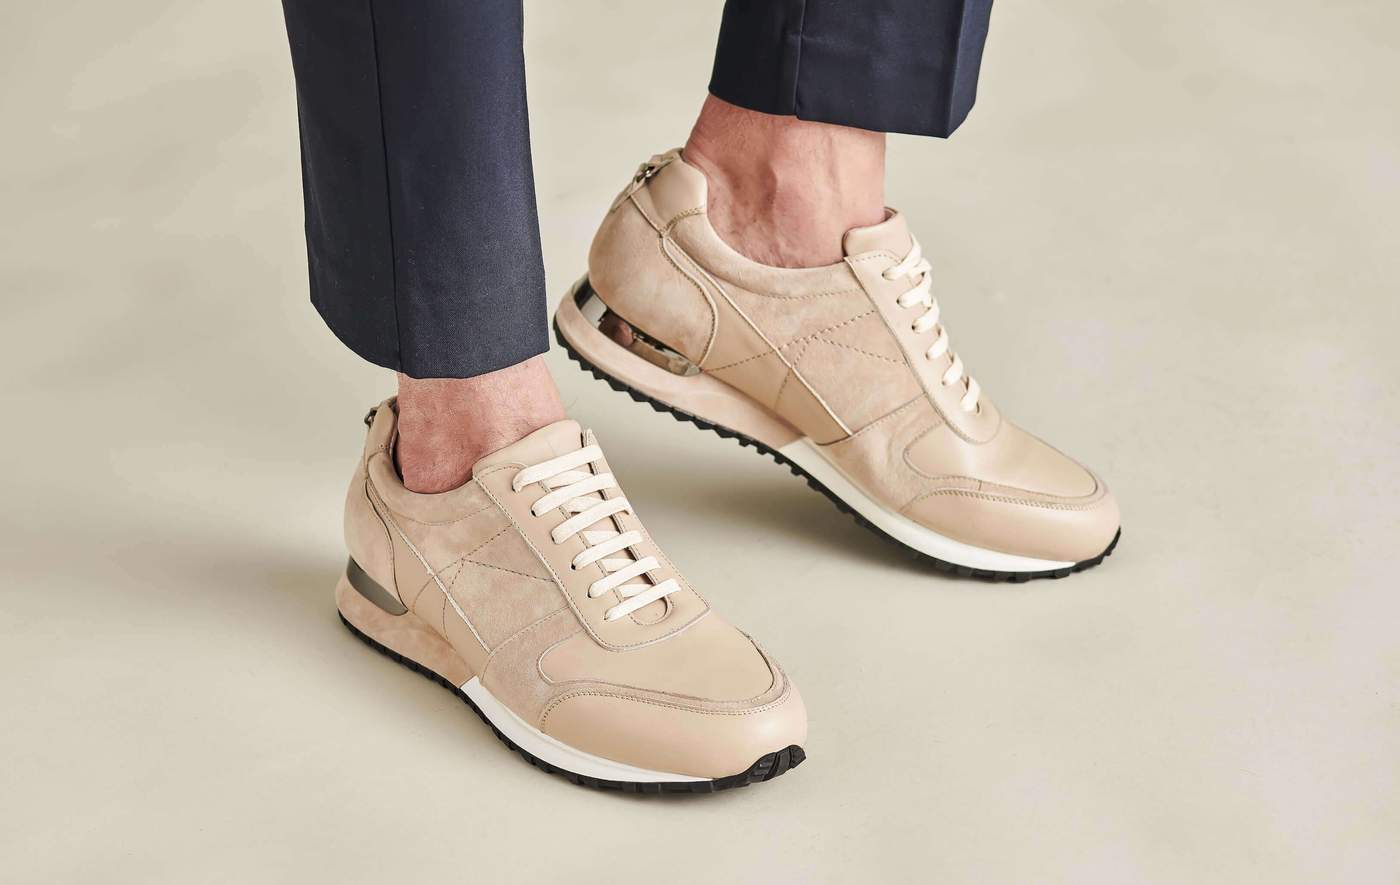 Best Leather Sneakers for Men Beyond the Basic White Sneaker